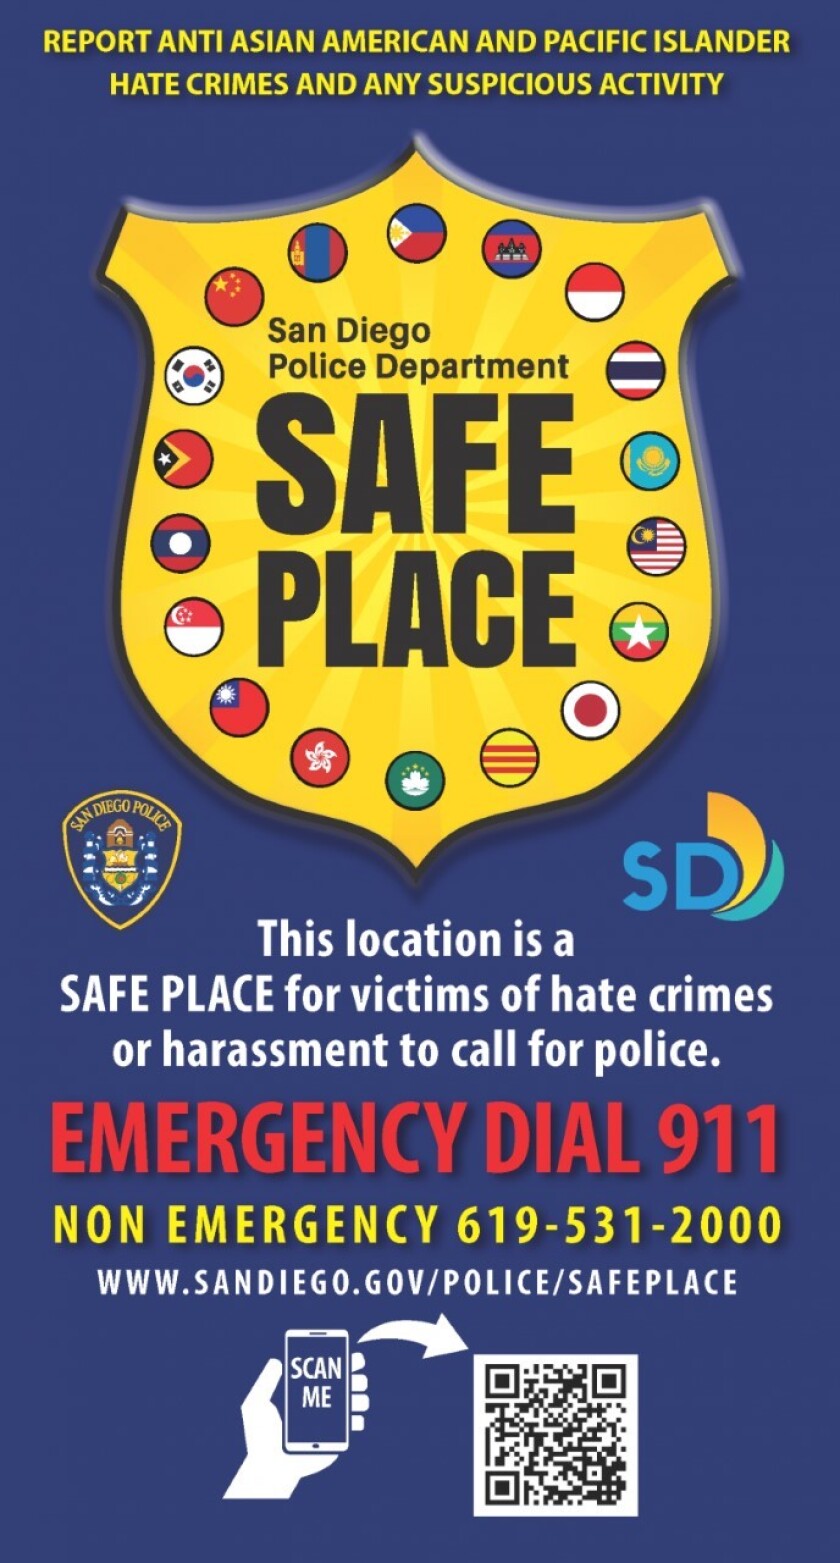 This decal will be displayed at participating La Jolla businesses as part of San Diego's "Safe Place" program.